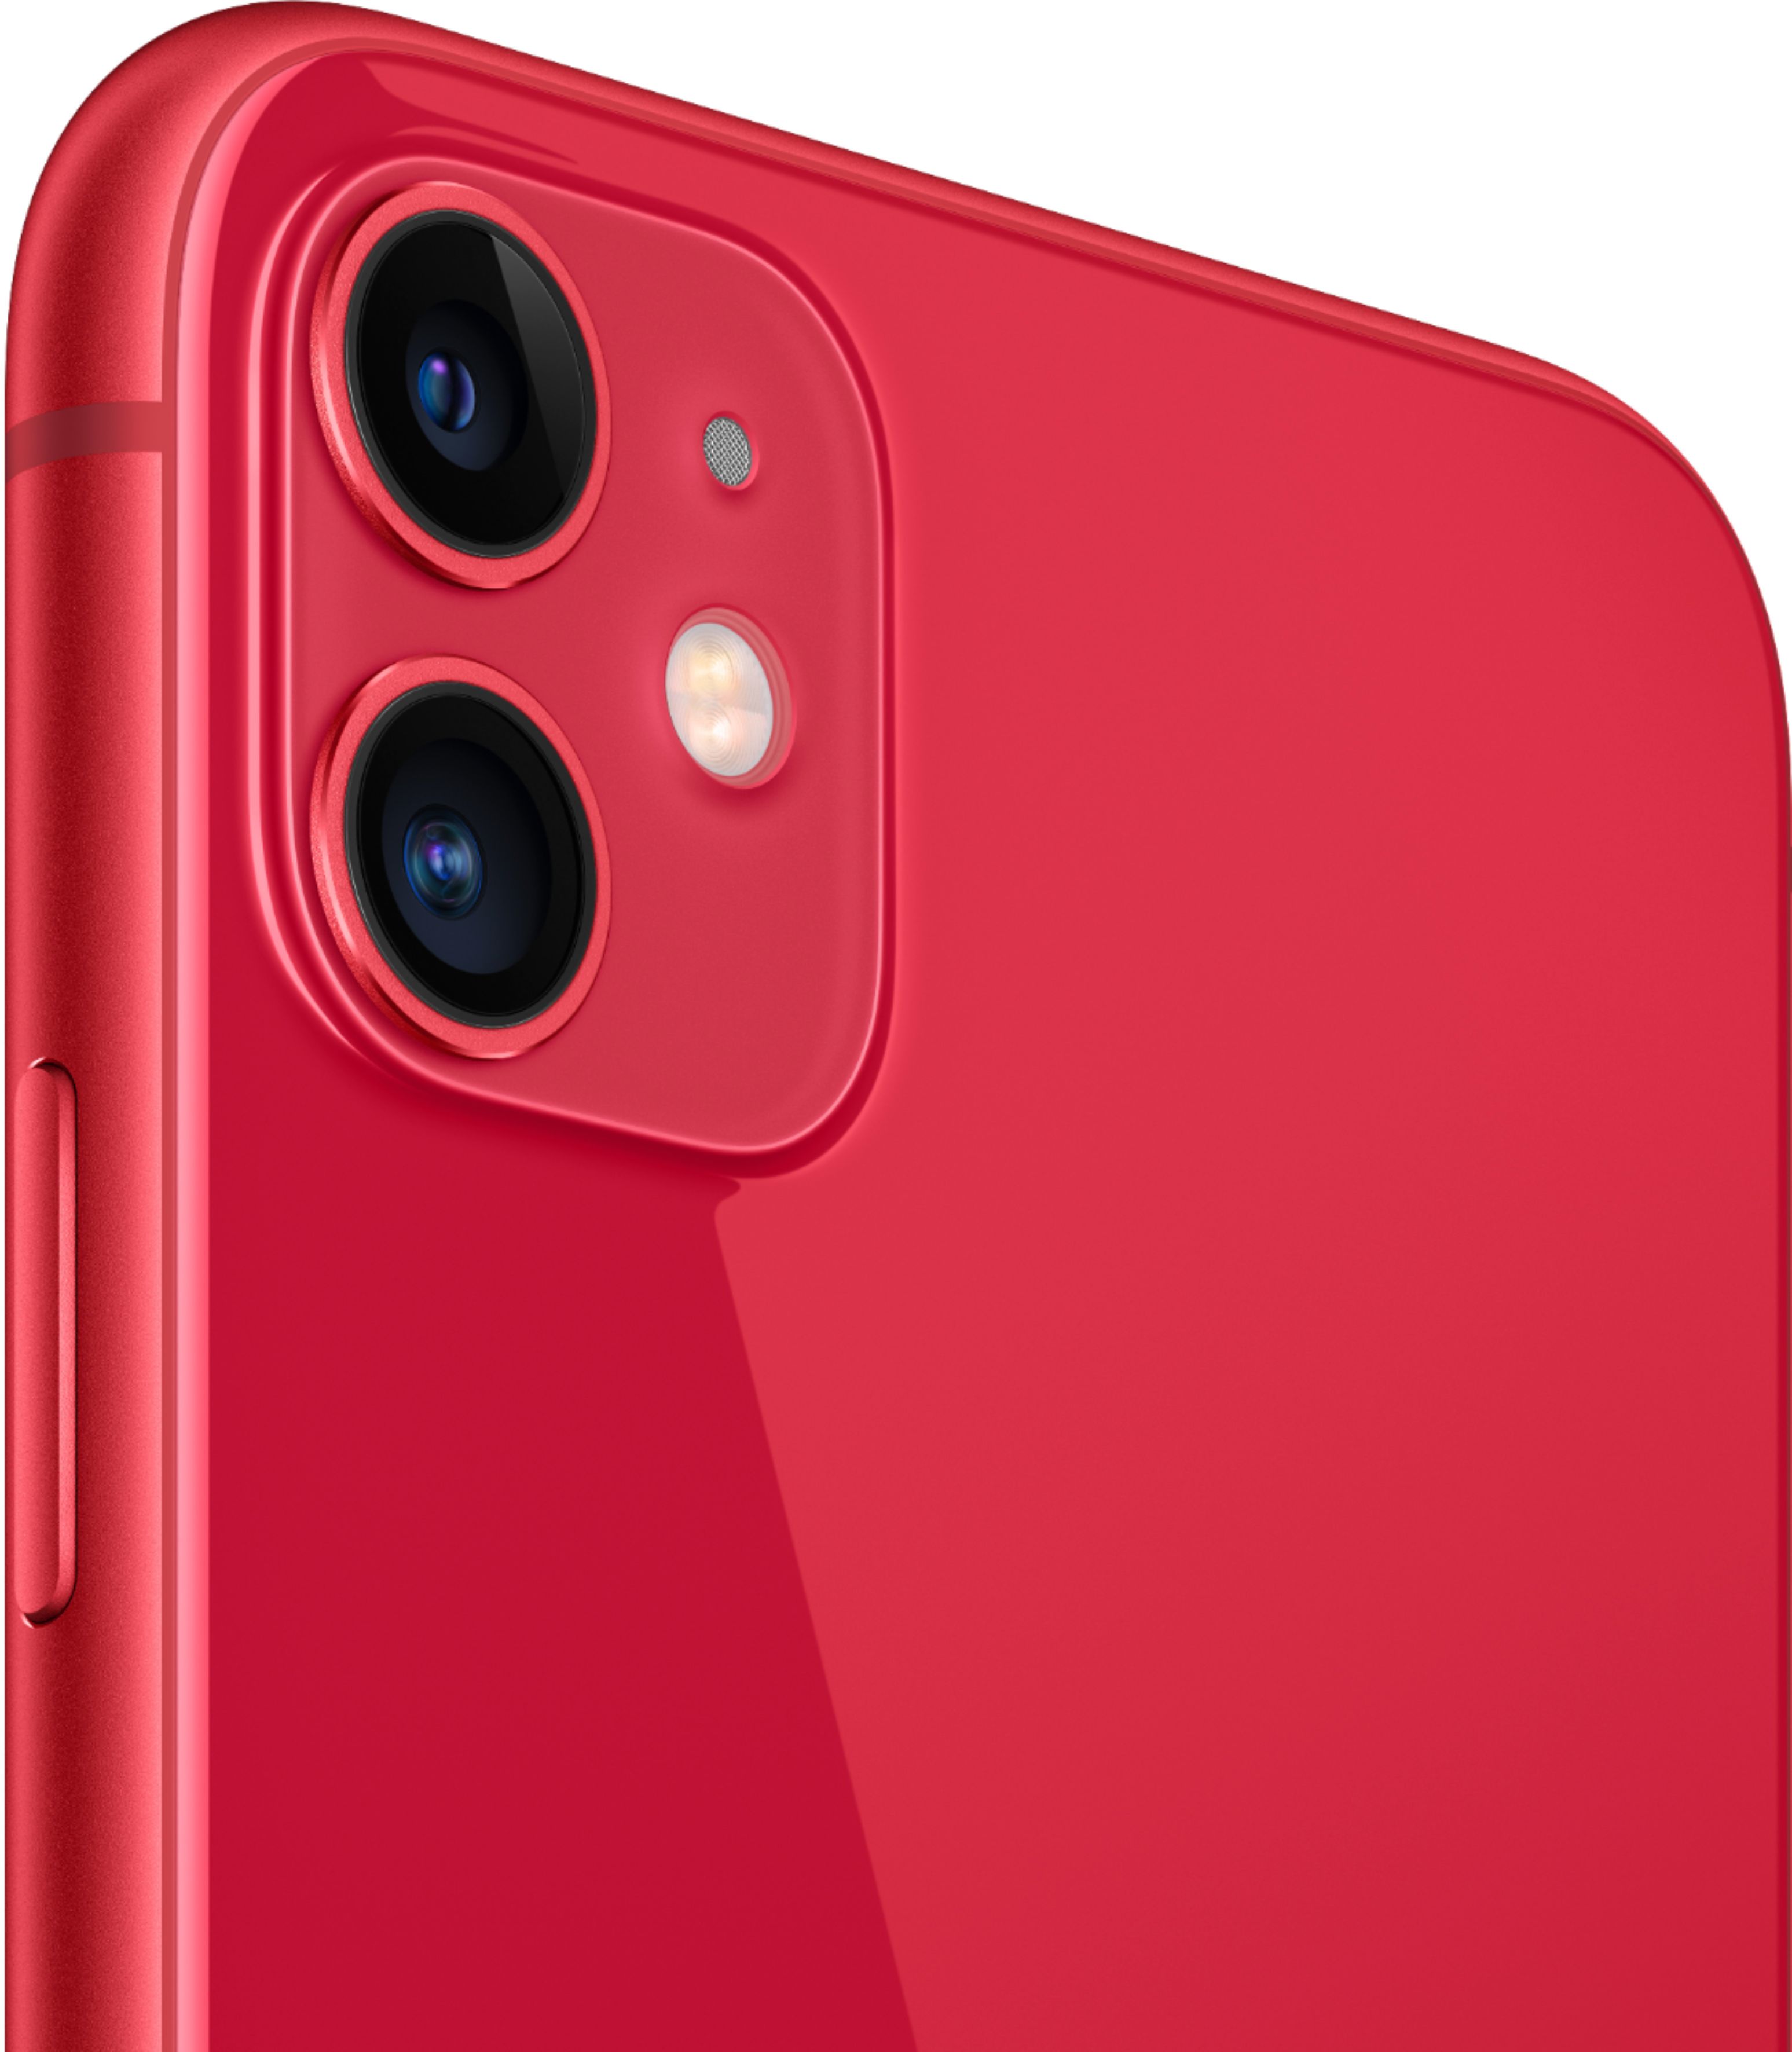 Best Buy: Apple iPhone 11 128GB (PRODUCT)RED (Verizon) MHD03LL/A